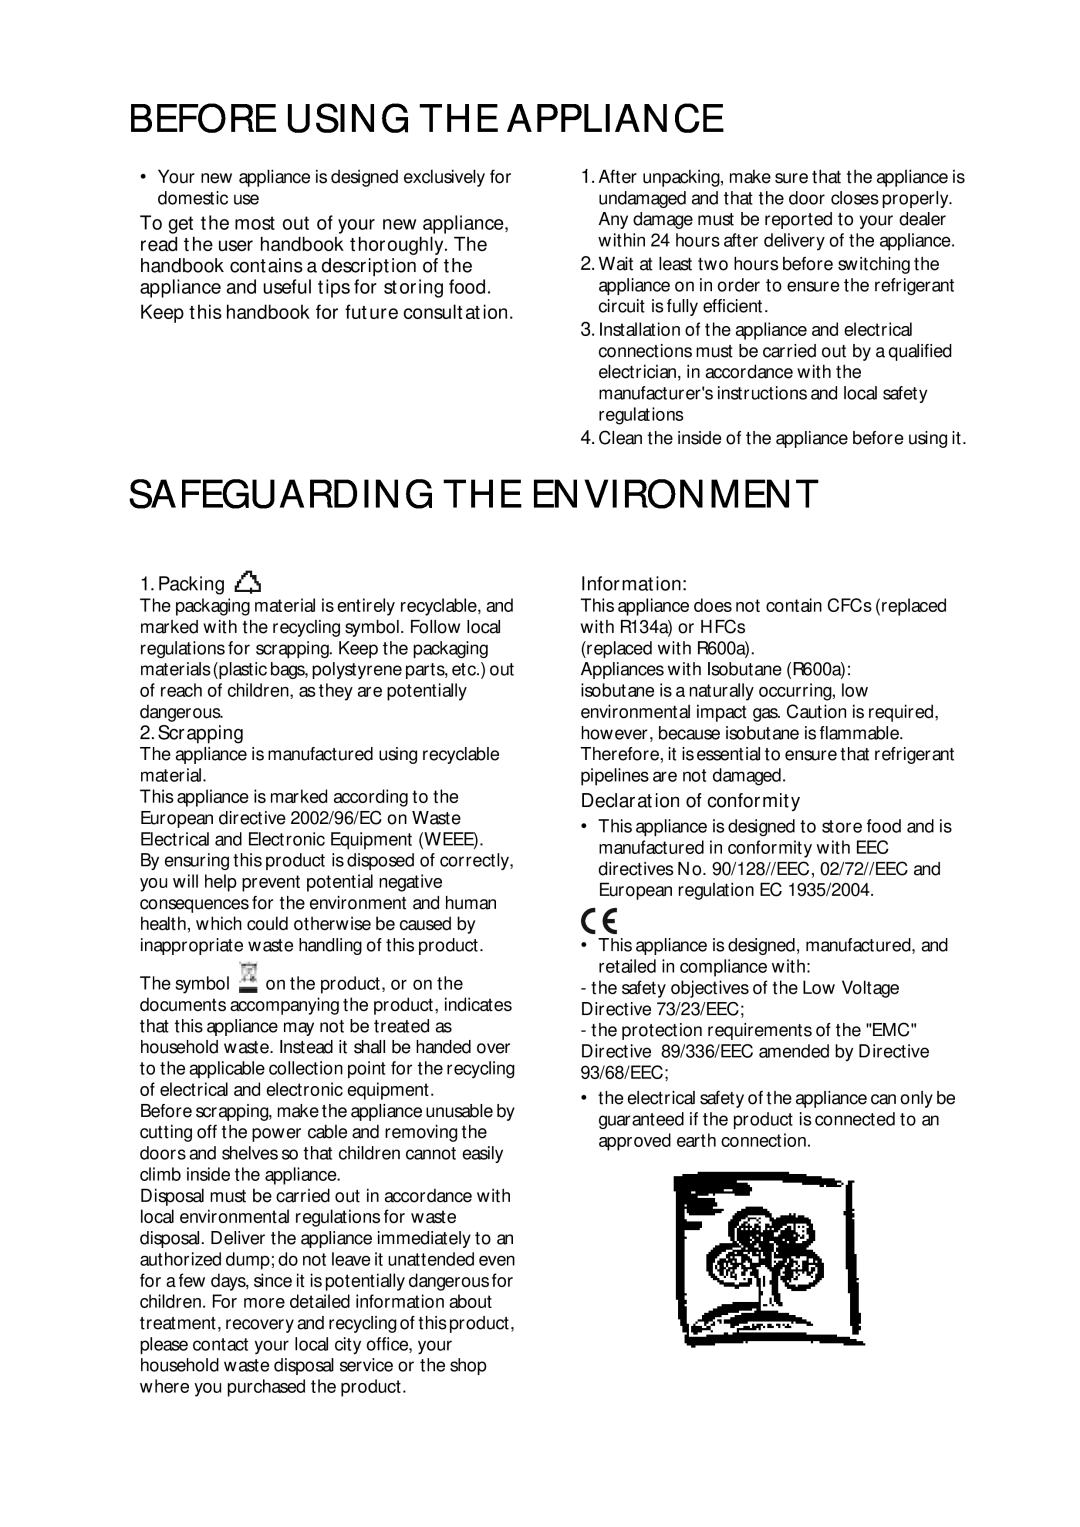 CDA FW380 Before Using The Appliance, Safeguarding The Environment, Keep this handbook for future consultation, Packing 